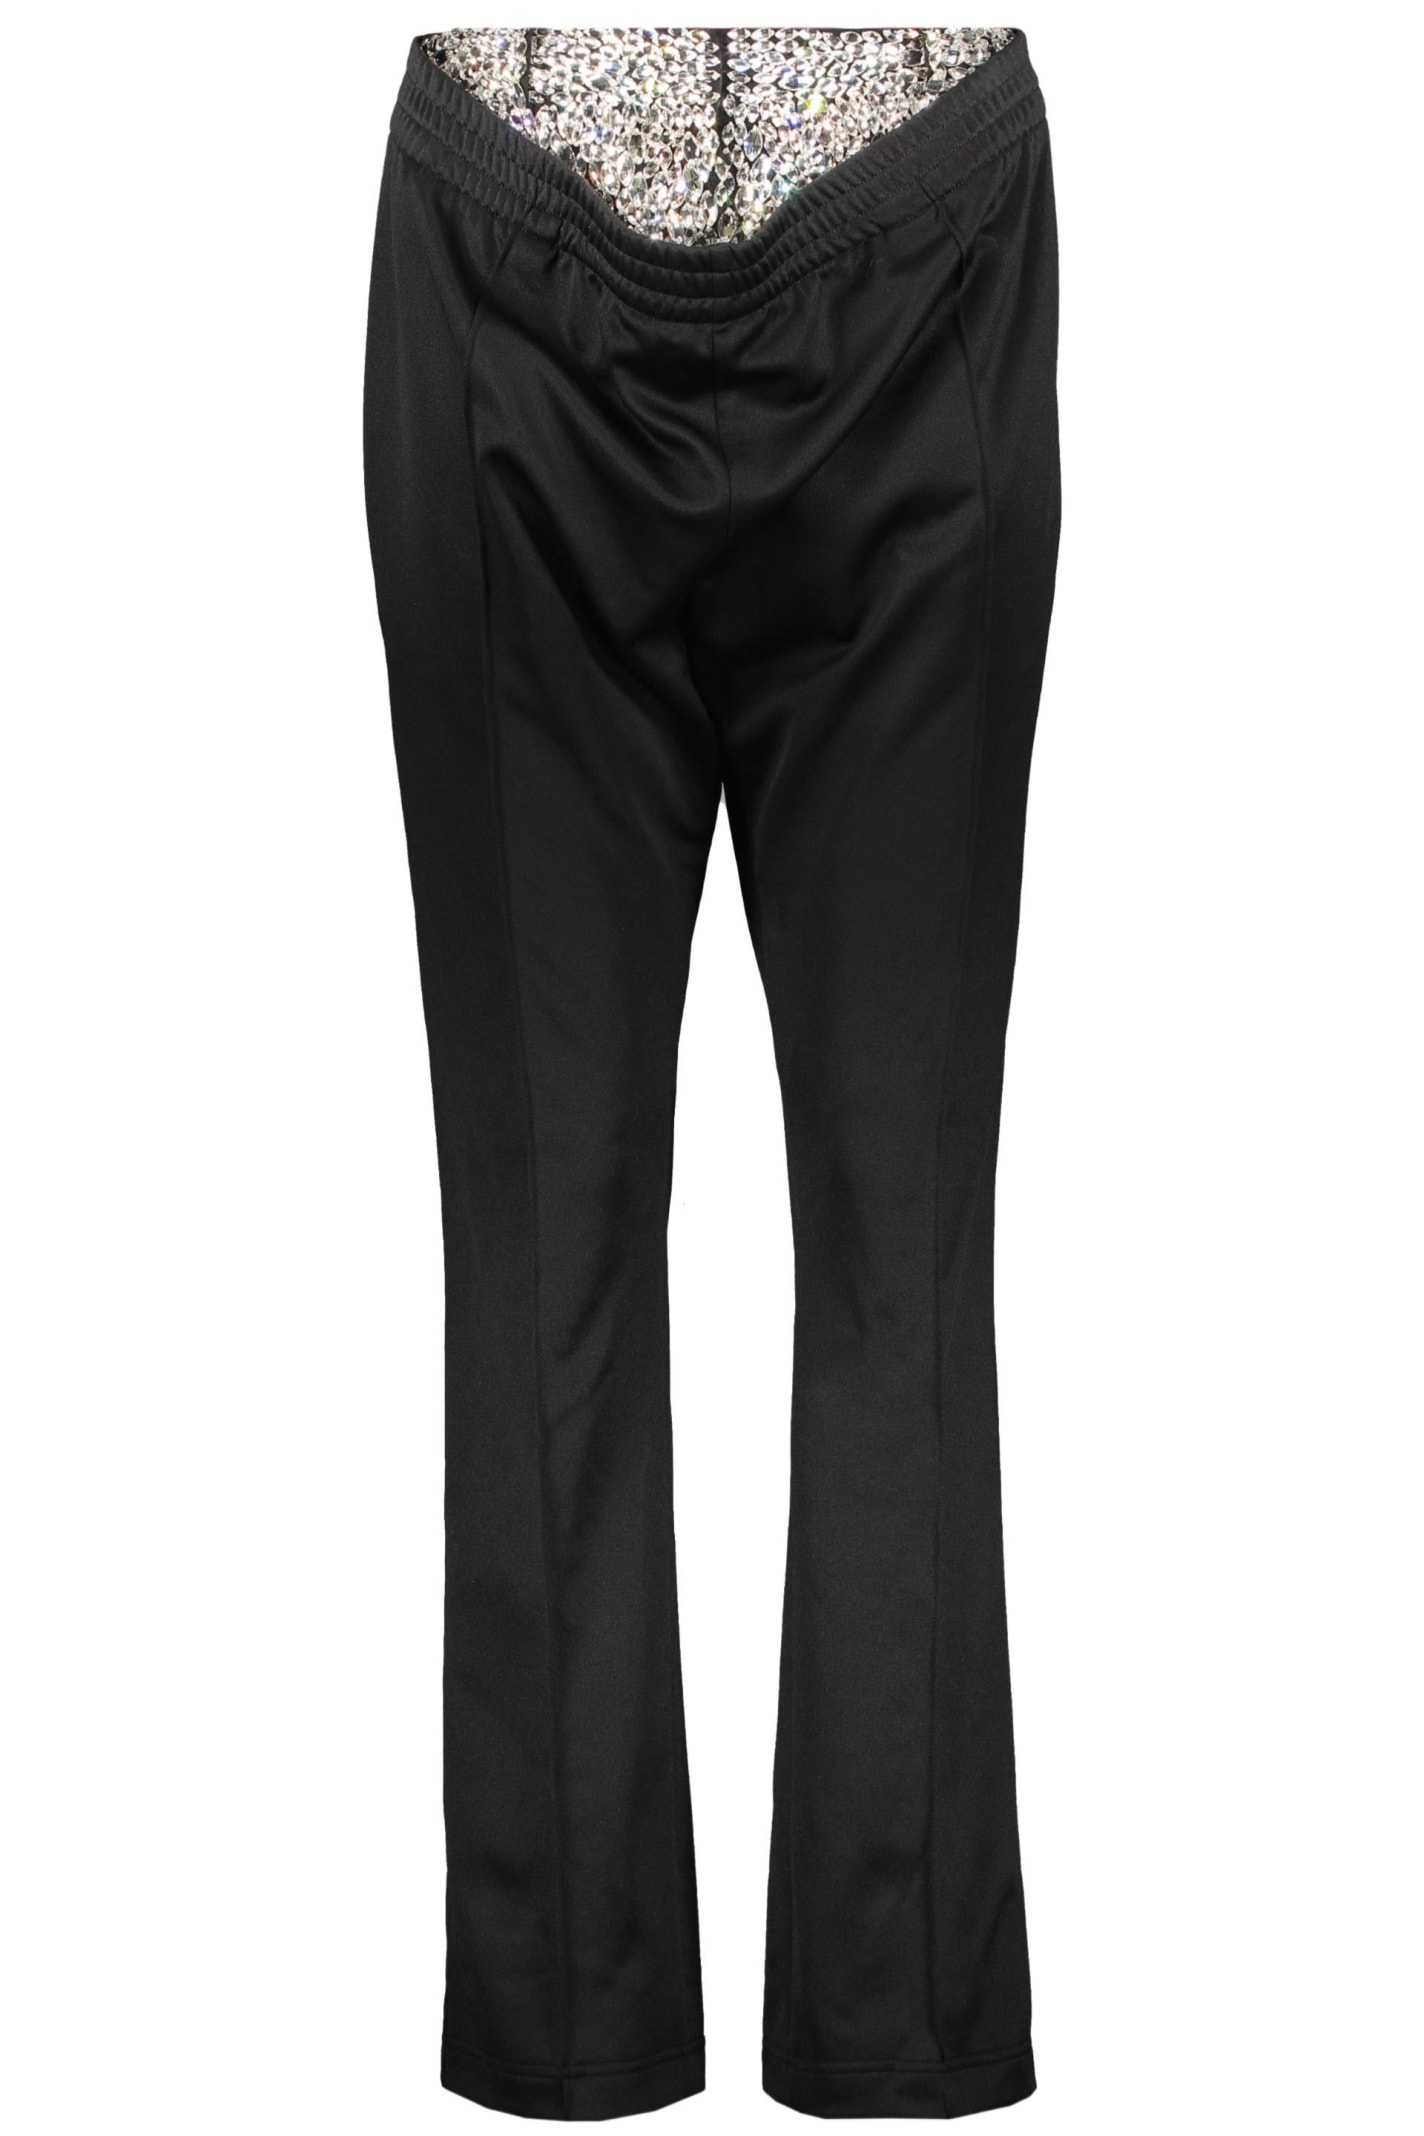 Burberry Long Trousers